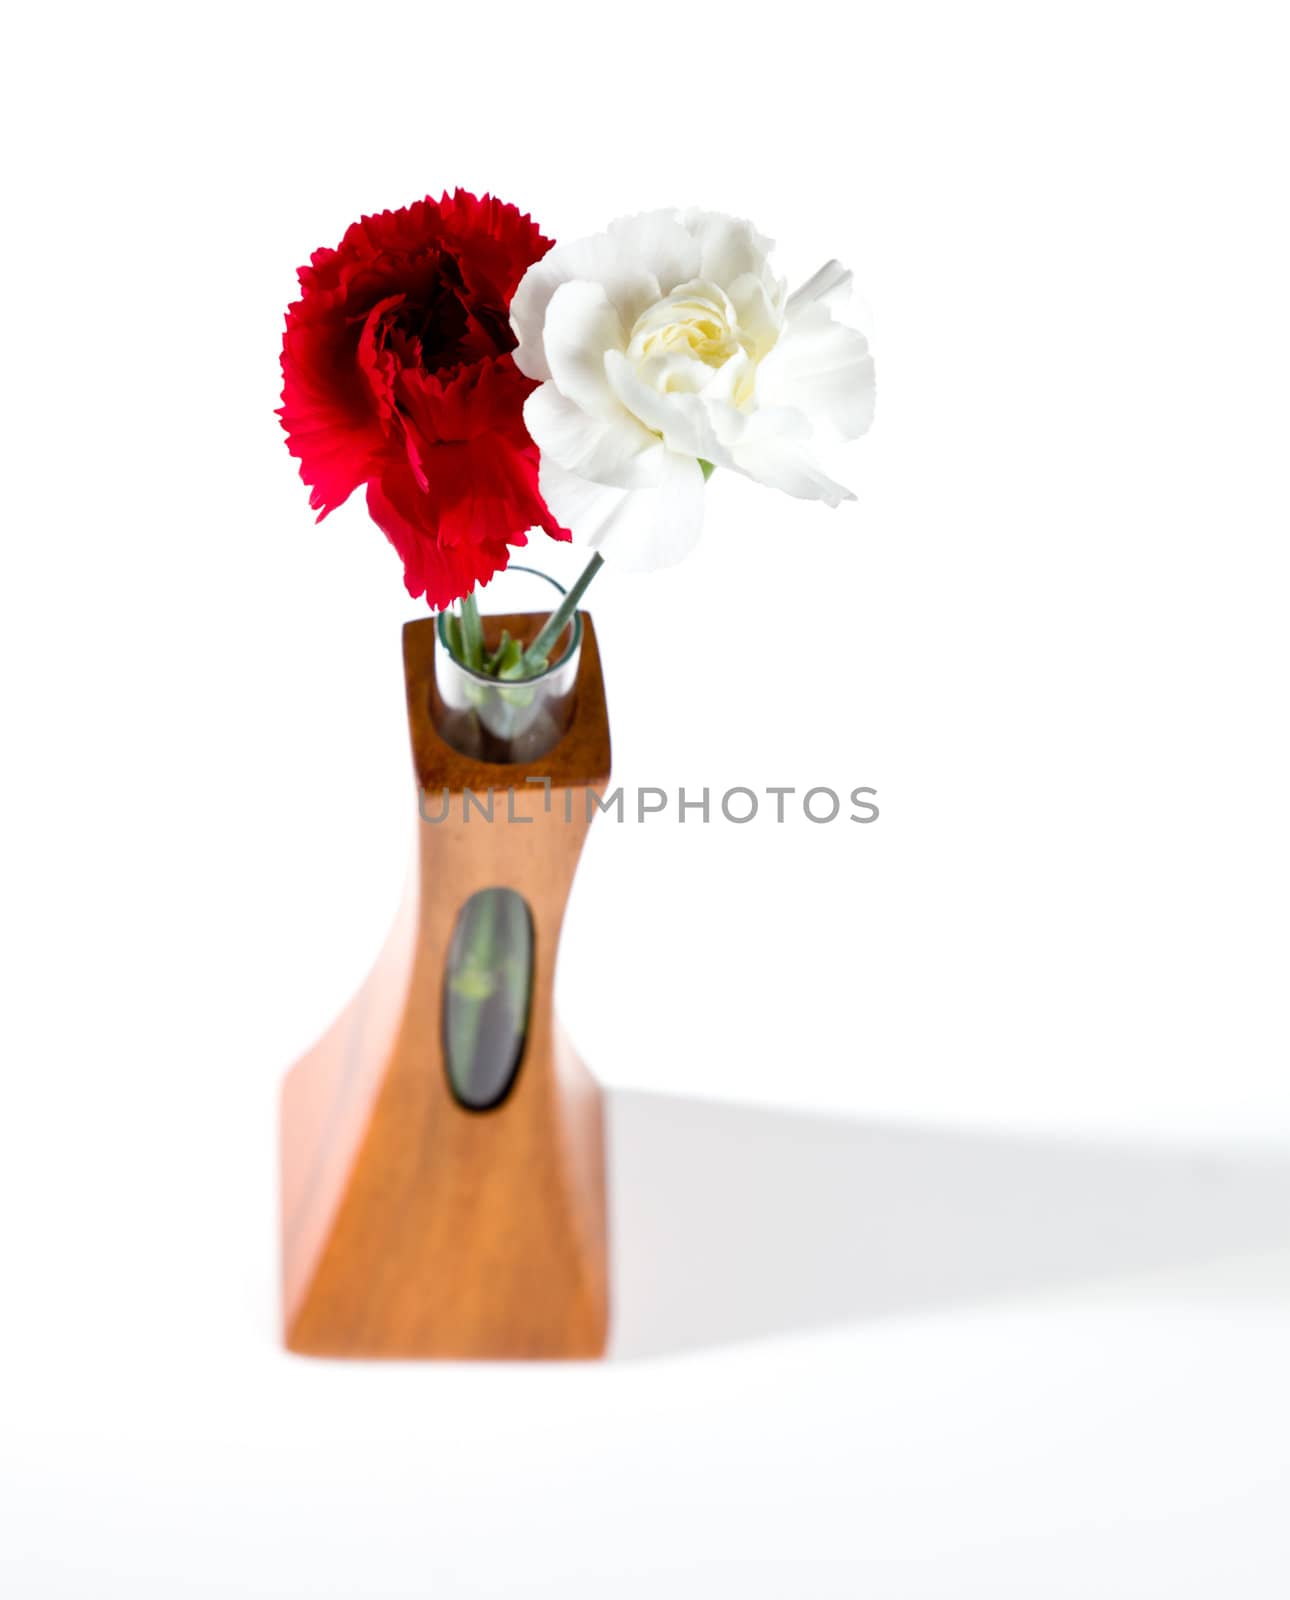 Single red and white spray carnation blossoms in a carved teak vase with unique opening showing the stem